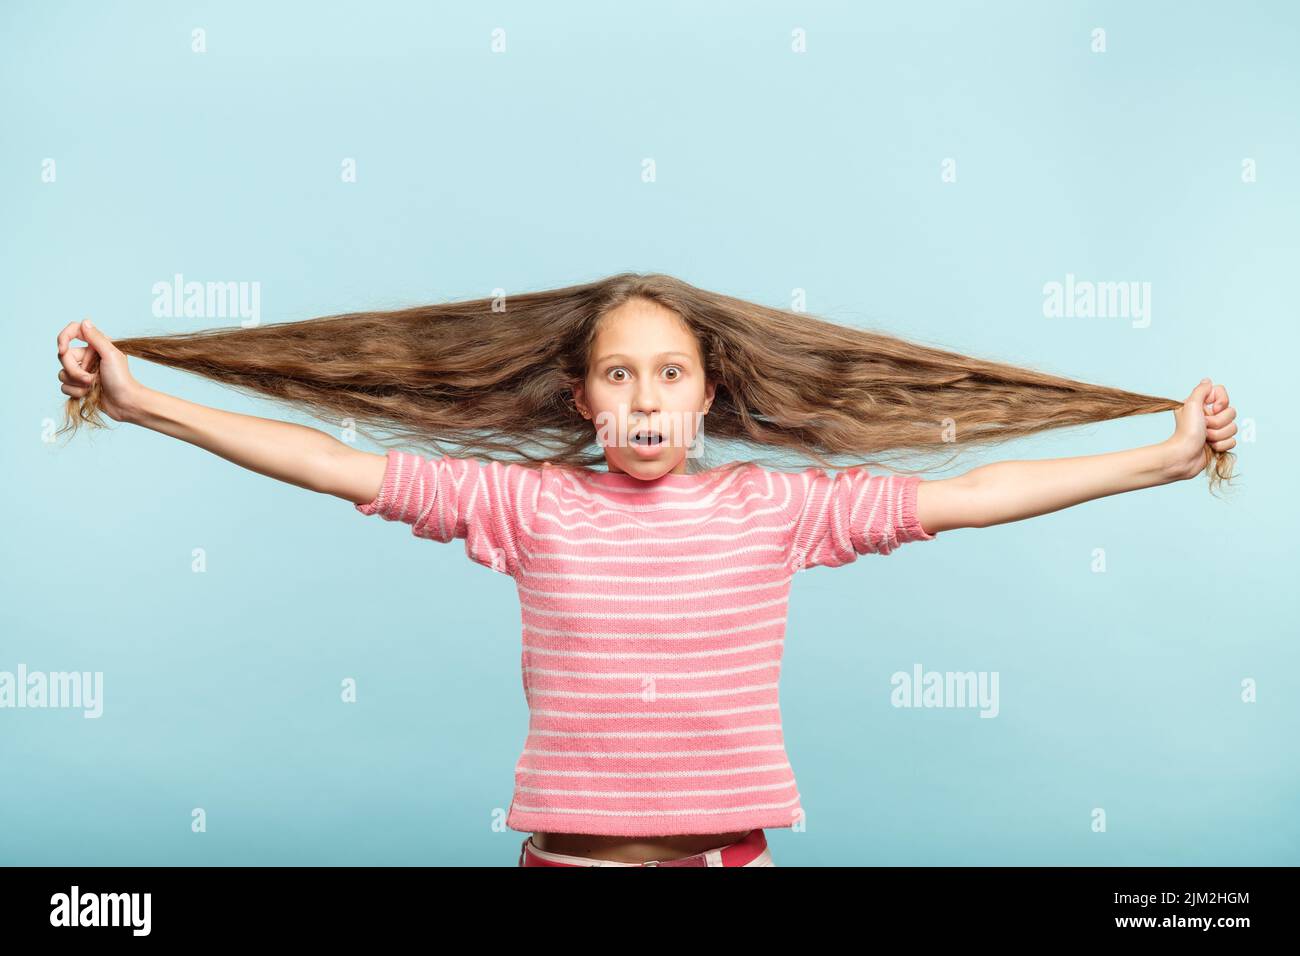 haircare styling shocked girl hold long wavy hair Stock Photo